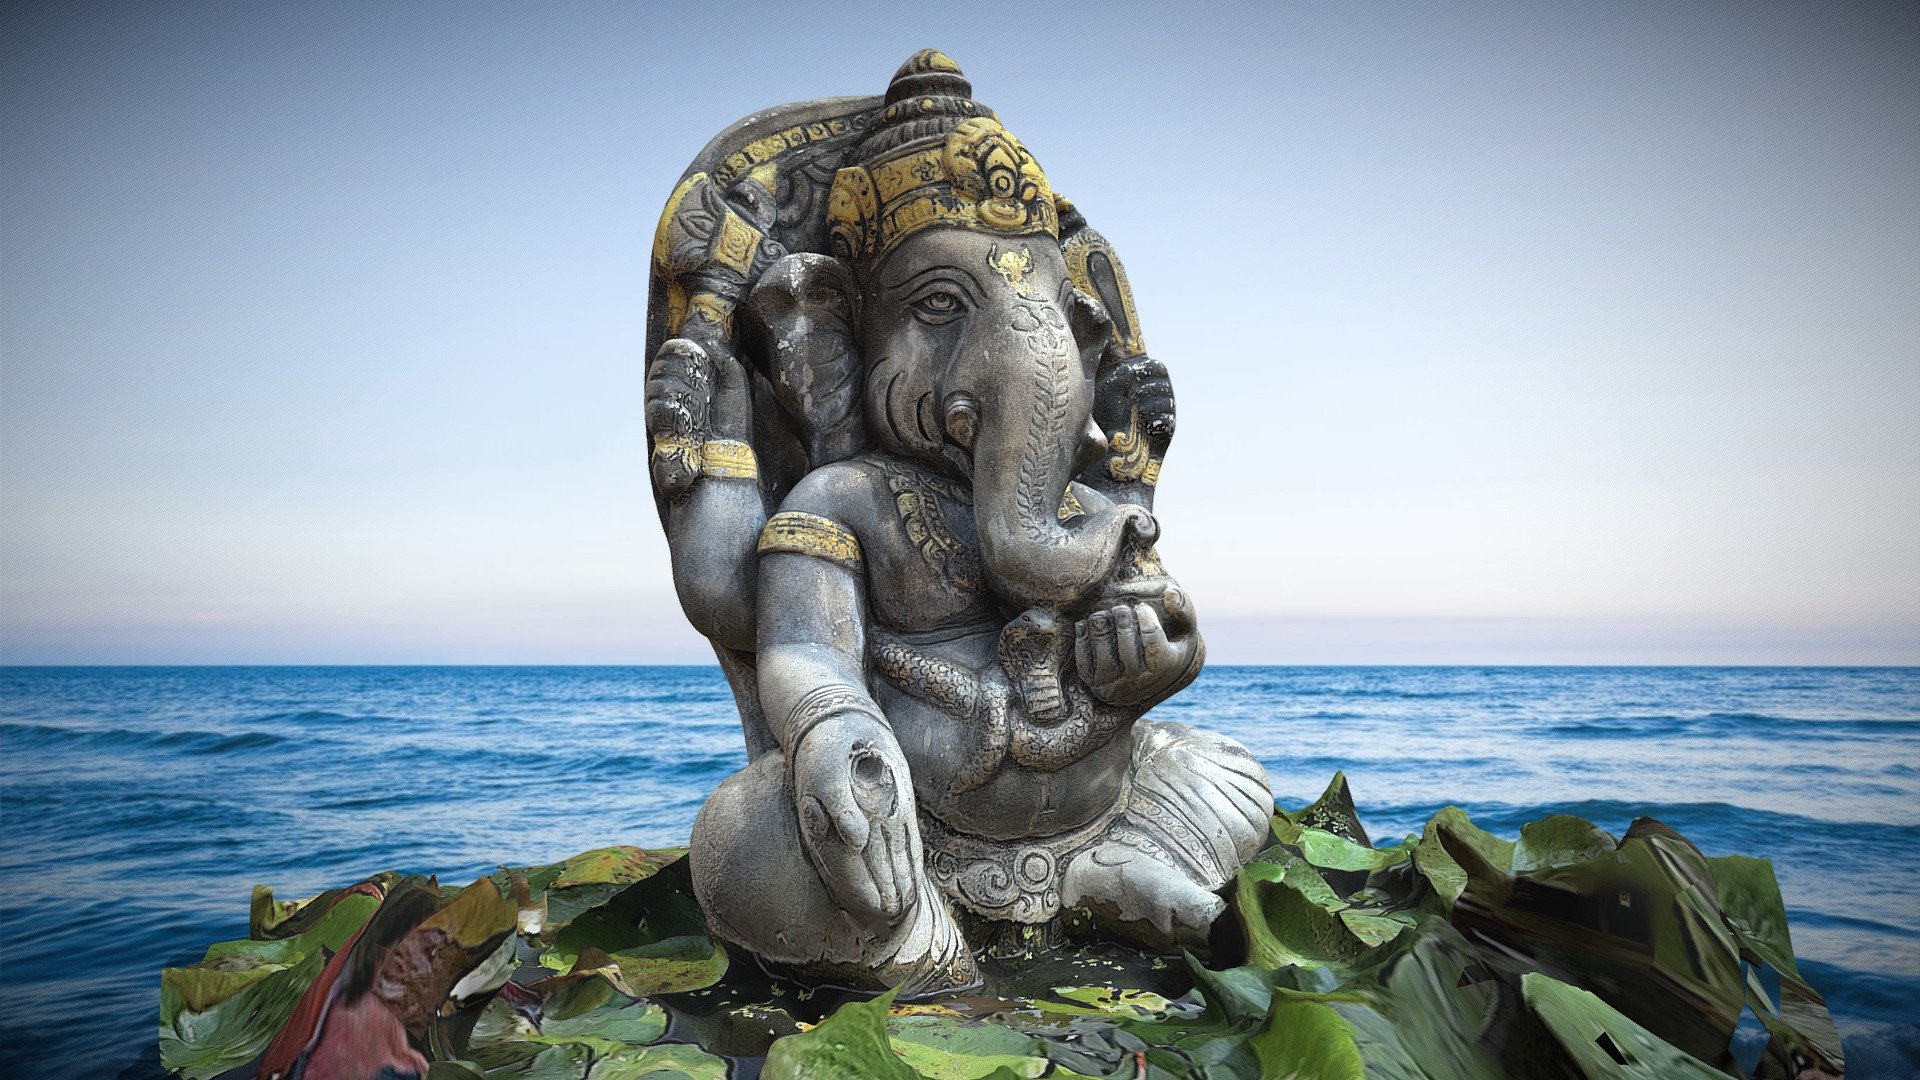 Character - Ganesha I พระพิฆเนศ

Ganesha , also known as Ganesh, Ganapati, Vinayaka, and Pillaiyar, is one of the best-known and most worshipped deities in the Hindu pantheonand is the Supreme God in Ganapatya sect. His depictions are found throughout India.Hindu denominations worship him regardless of affiliations.Devotion to Ganesha is widely diffused and extends to Jains and Buddhists and includes Nepal, Philippines, Bangladesh, Sri Lanka, Indonesia (Java), Thailand, Myanmar, China, and Japan and in countries.


holything sacred god Buddhist  item deity goddess idol  history historical

india indian Nepal Philippines Bangladesh SriLanka Indonesia Thailand Myanmar China Japan figurine ganesha metashape photogrammetry

bronze photorealistic asian  ganesha brass metal statue religion deva deity storescanchallenge sketchfabssr substance photoscan photogrammetry decoration sculpture - Character - Ganesha statue IIII พระพิฆเนศ - Buy Royalty Free 3D model by KimtueKP 3d model